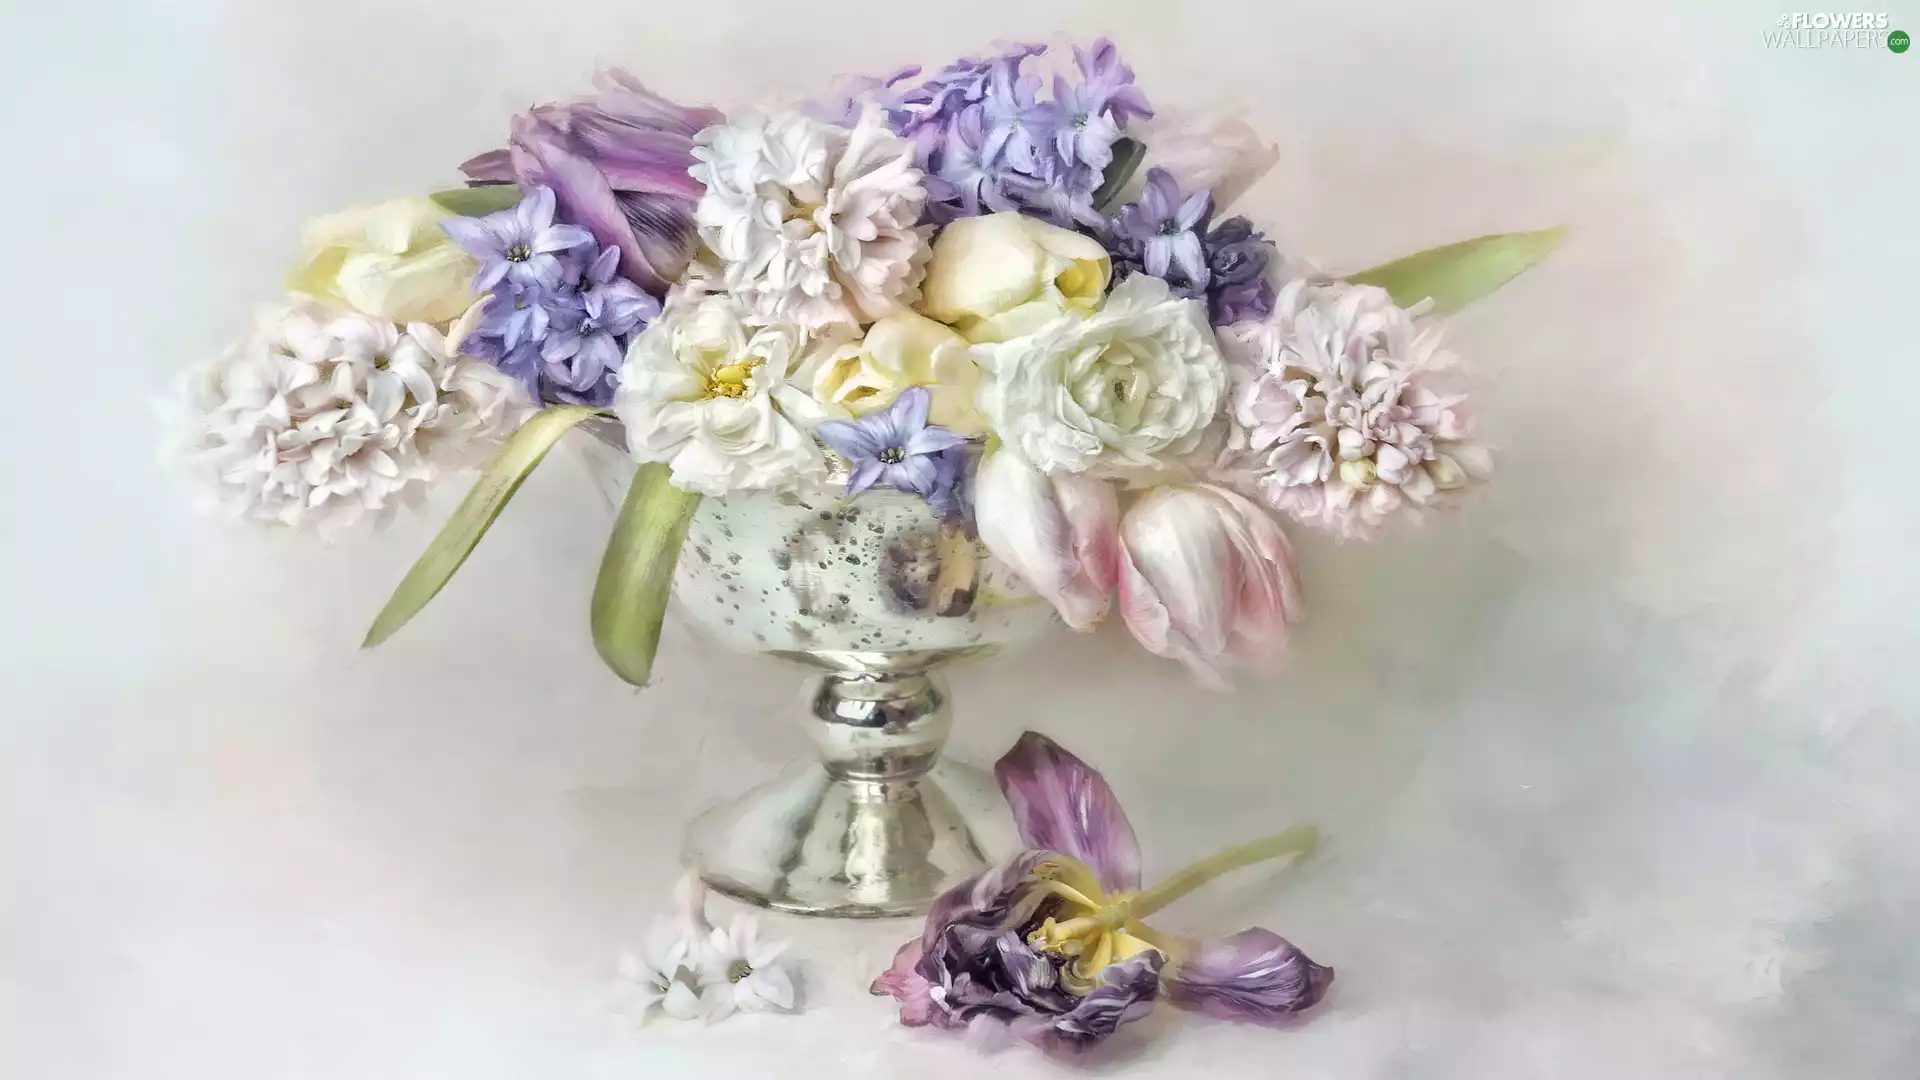 Hyacinths, Flowers, Vase, cup, Tulips, bouquet